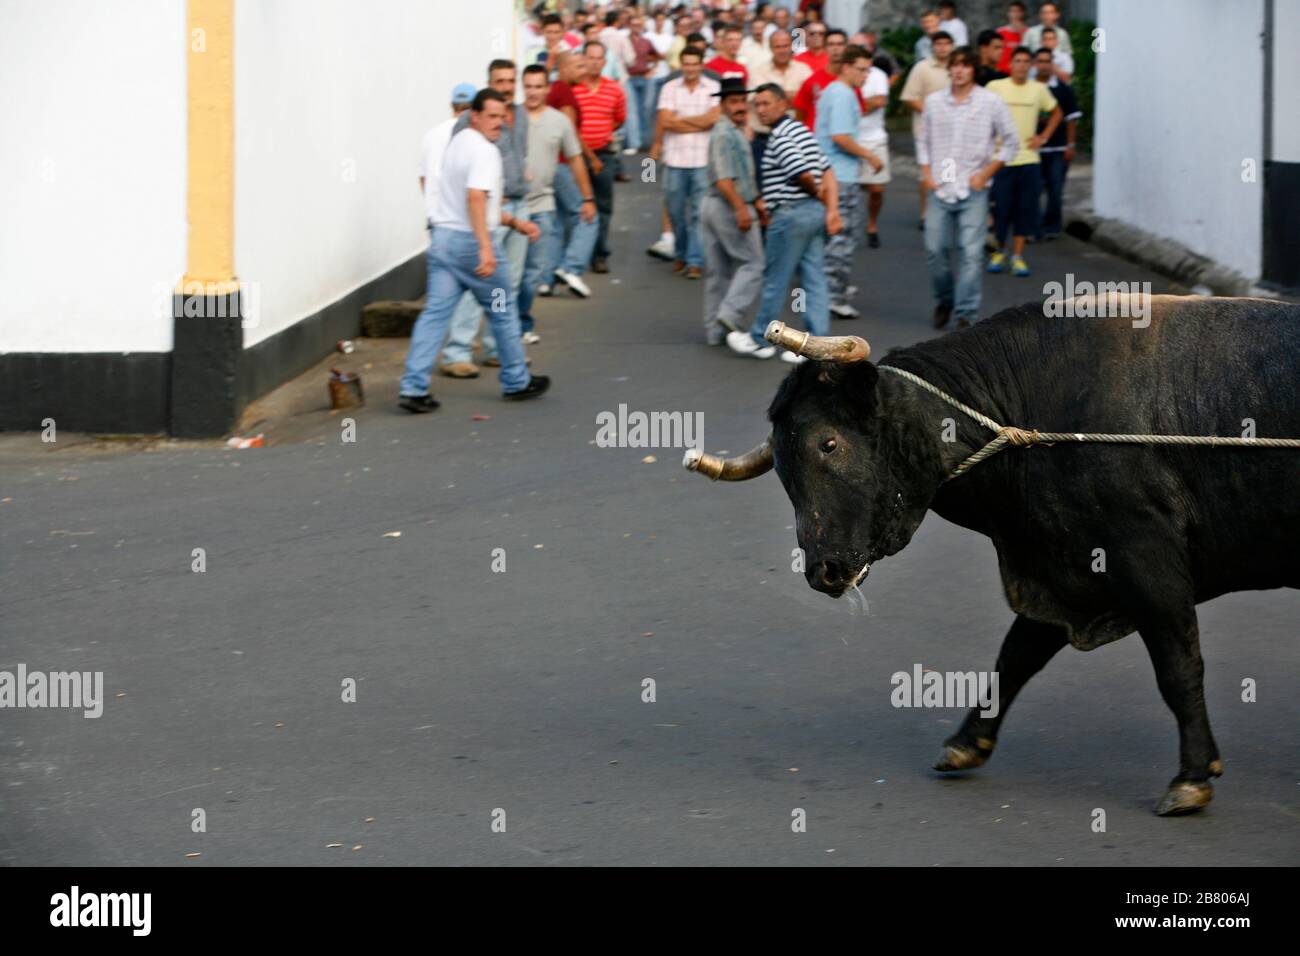 Tourada a corda, traditional fiesta in Terceira island. Bulls with a rope managed by shepherds in villages all around island. Açores islands, Portugal. Stock Photo